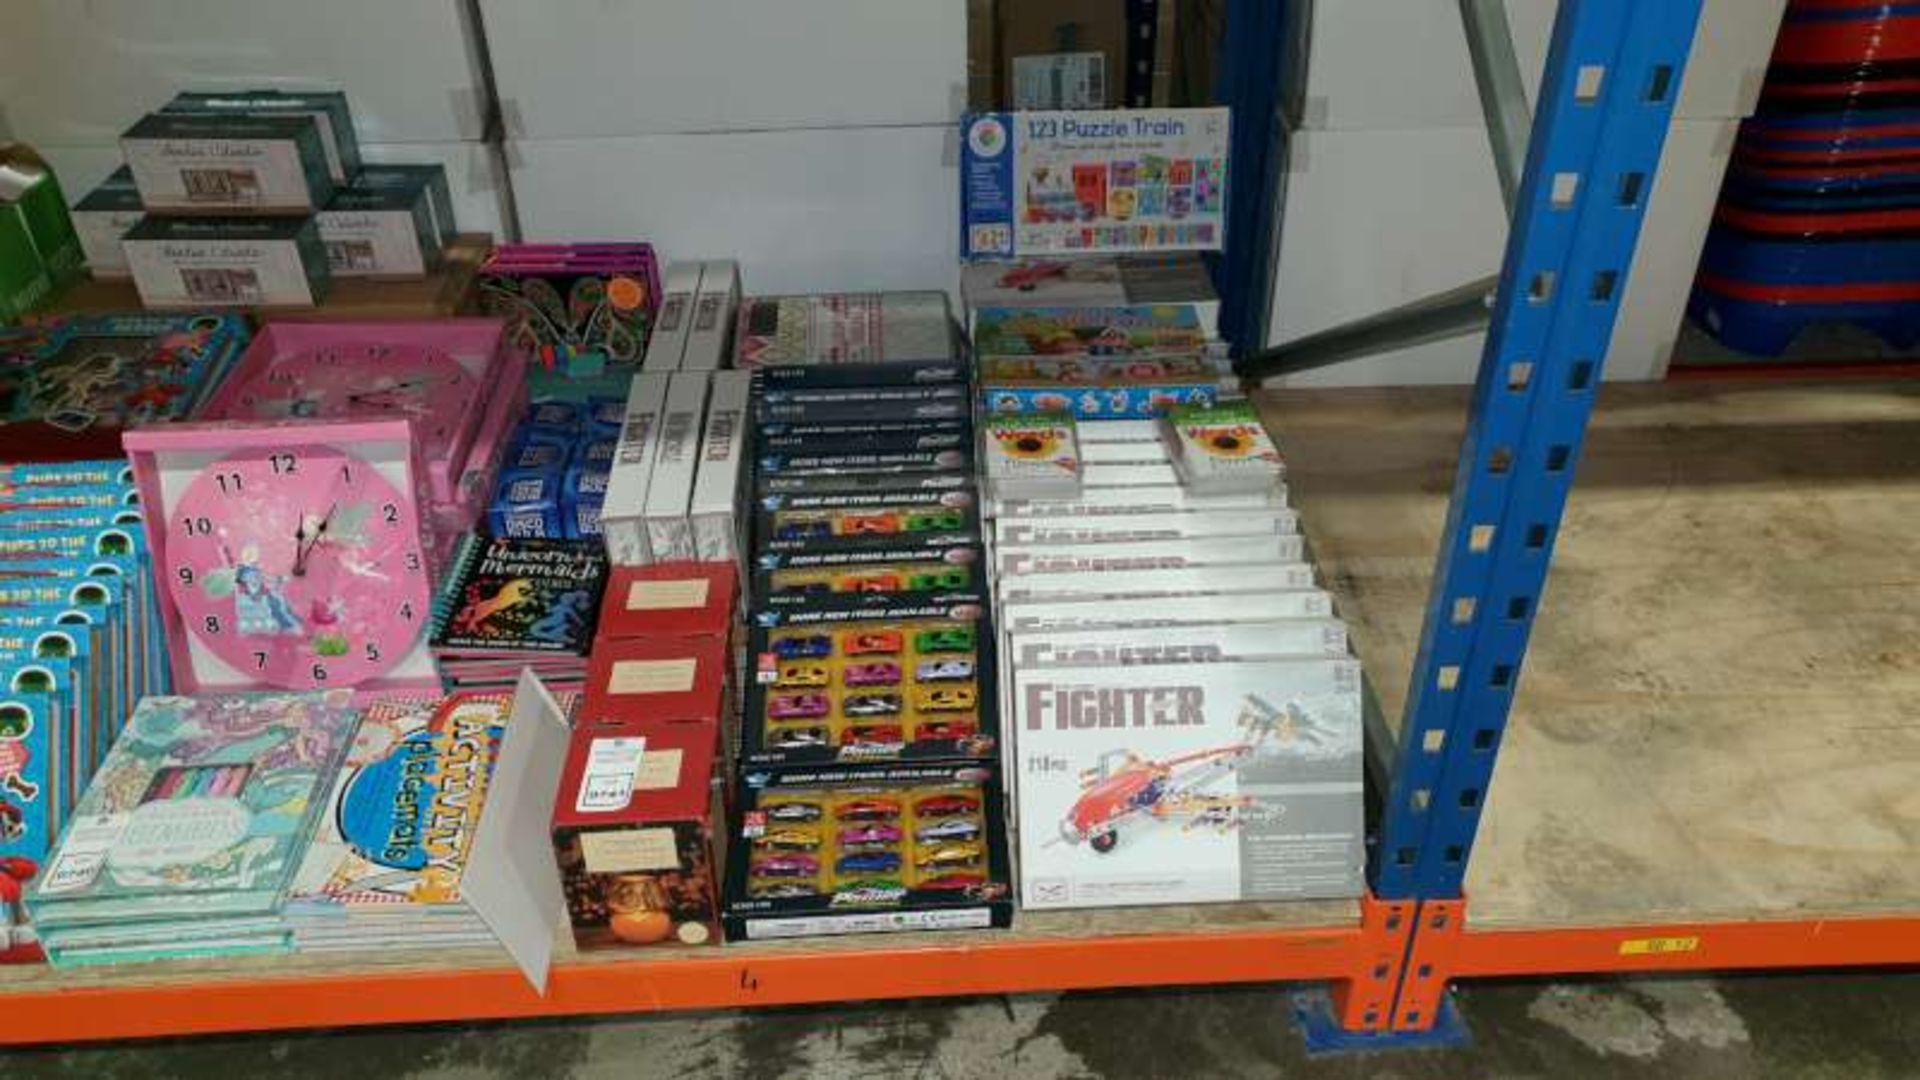 MIXED LOT CONTAINING FIGHTER PLANE CONSTRUCTION SETS, MAGNETIC ON THE FARM, CAR SETS, FRAGRANCE